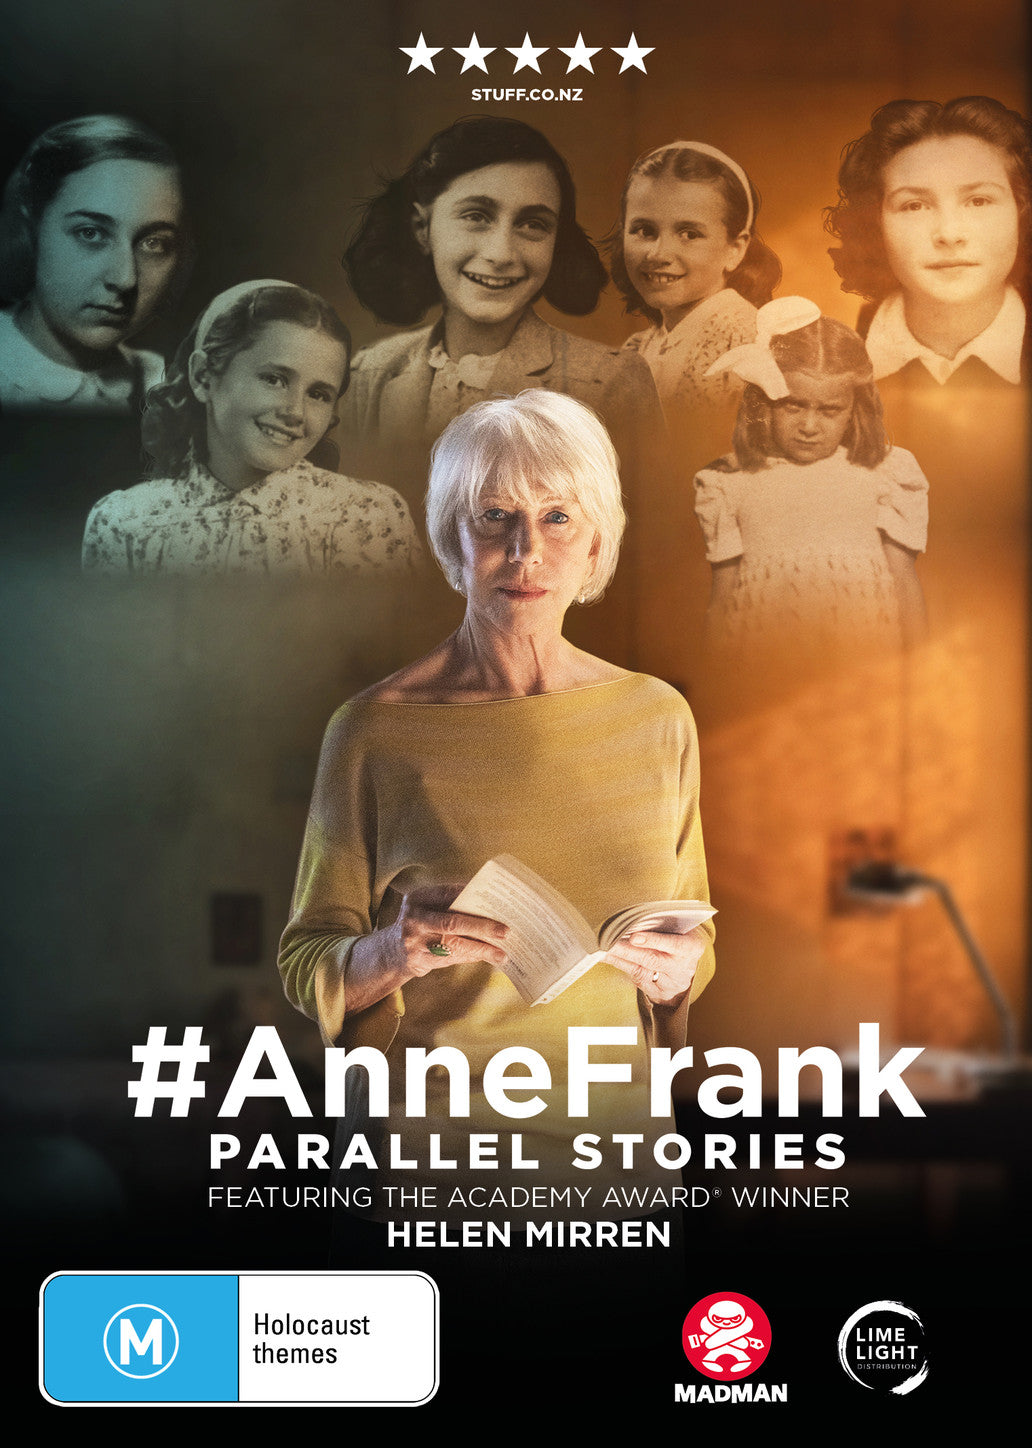 ANNE FRANK: PARALLEL STORIES